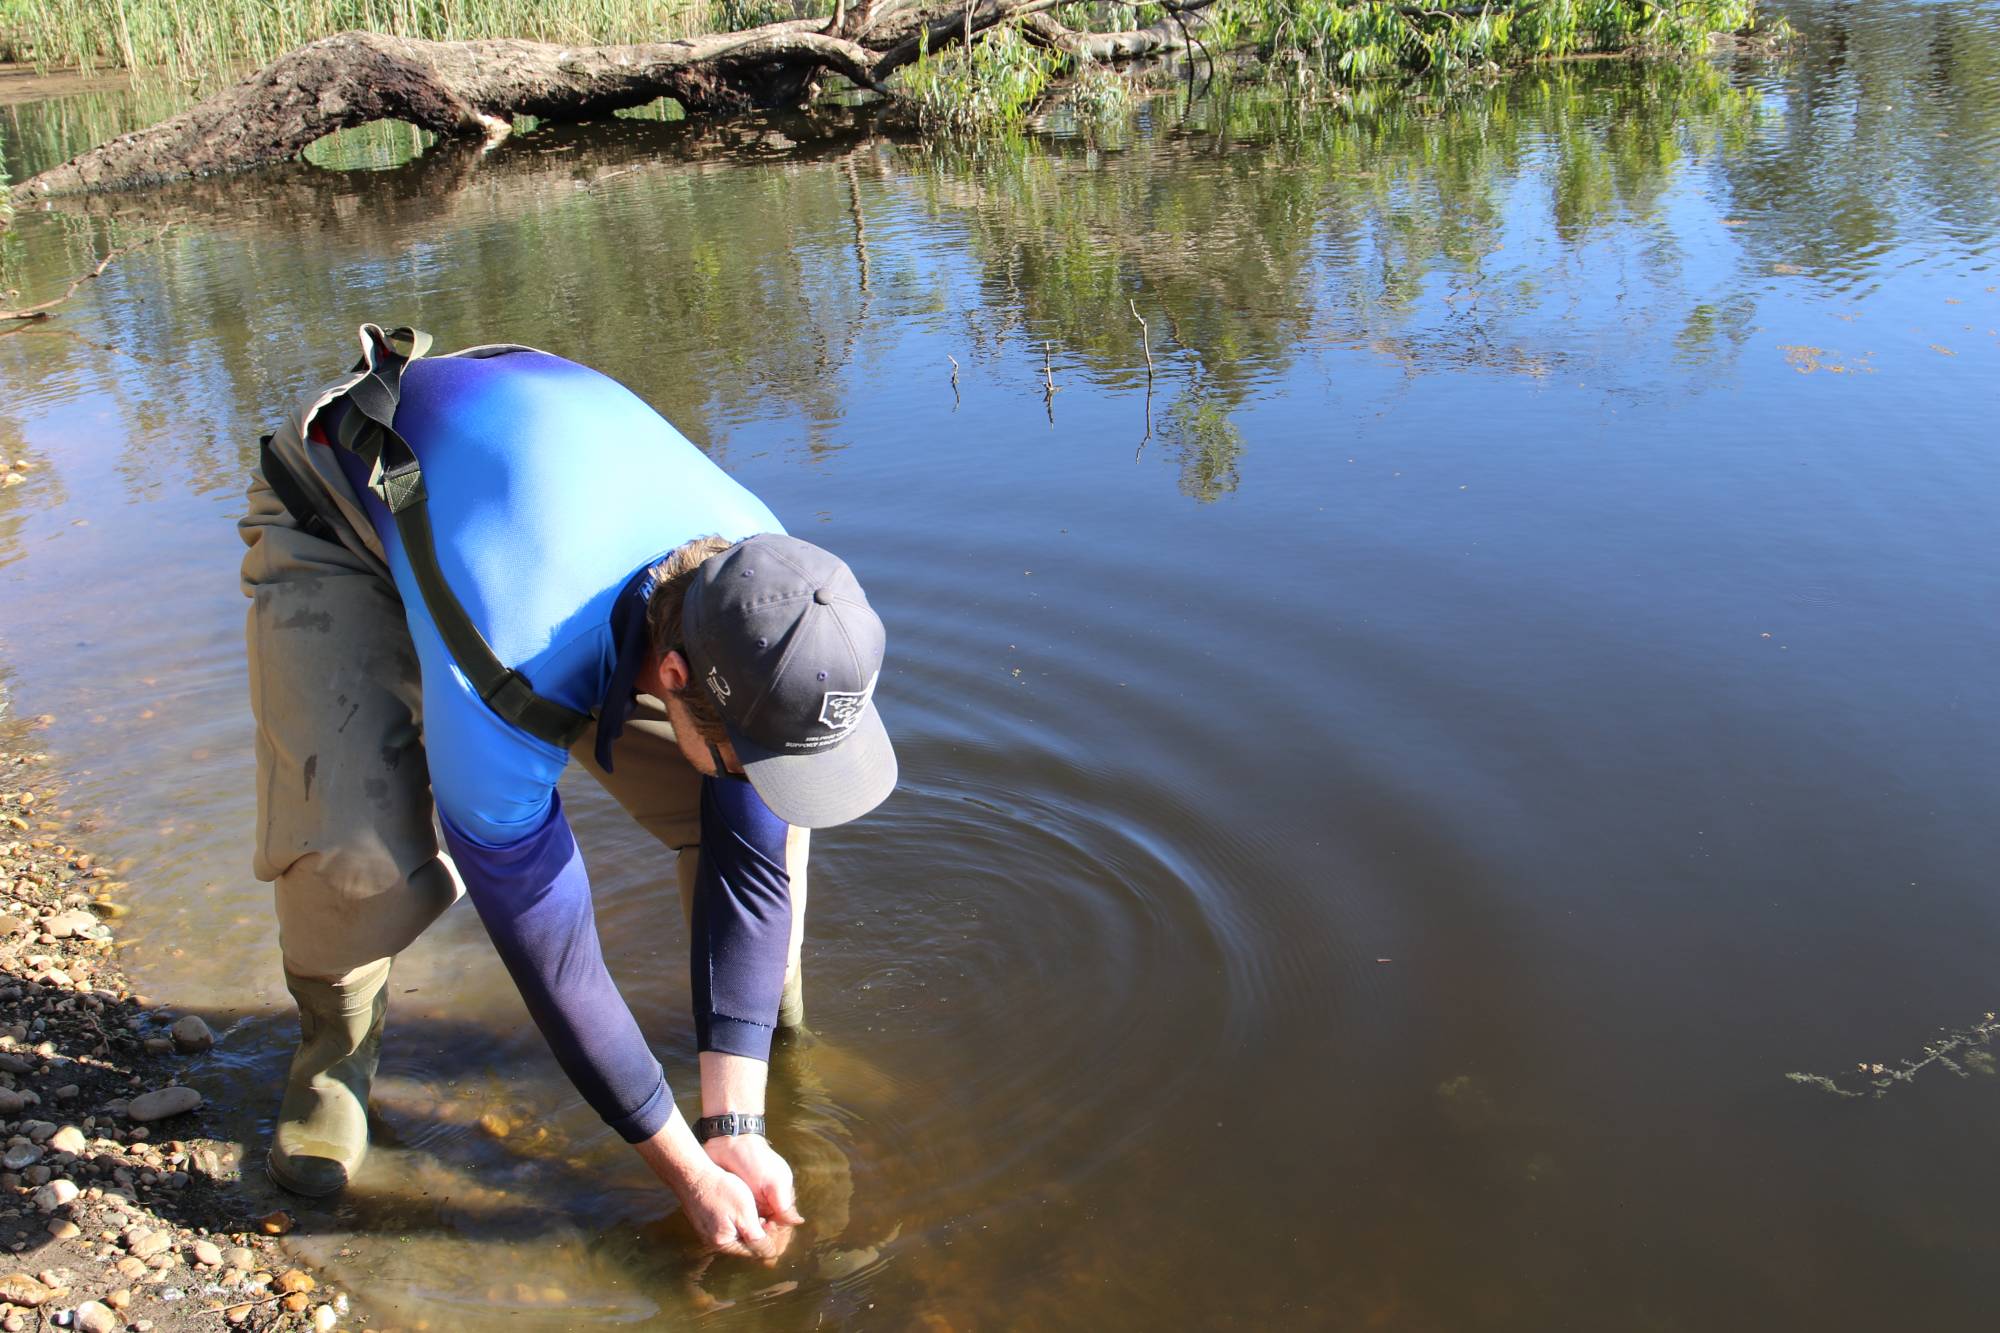 NSW DPI Fisheries staff releasing fish in lion moat at the Zoo